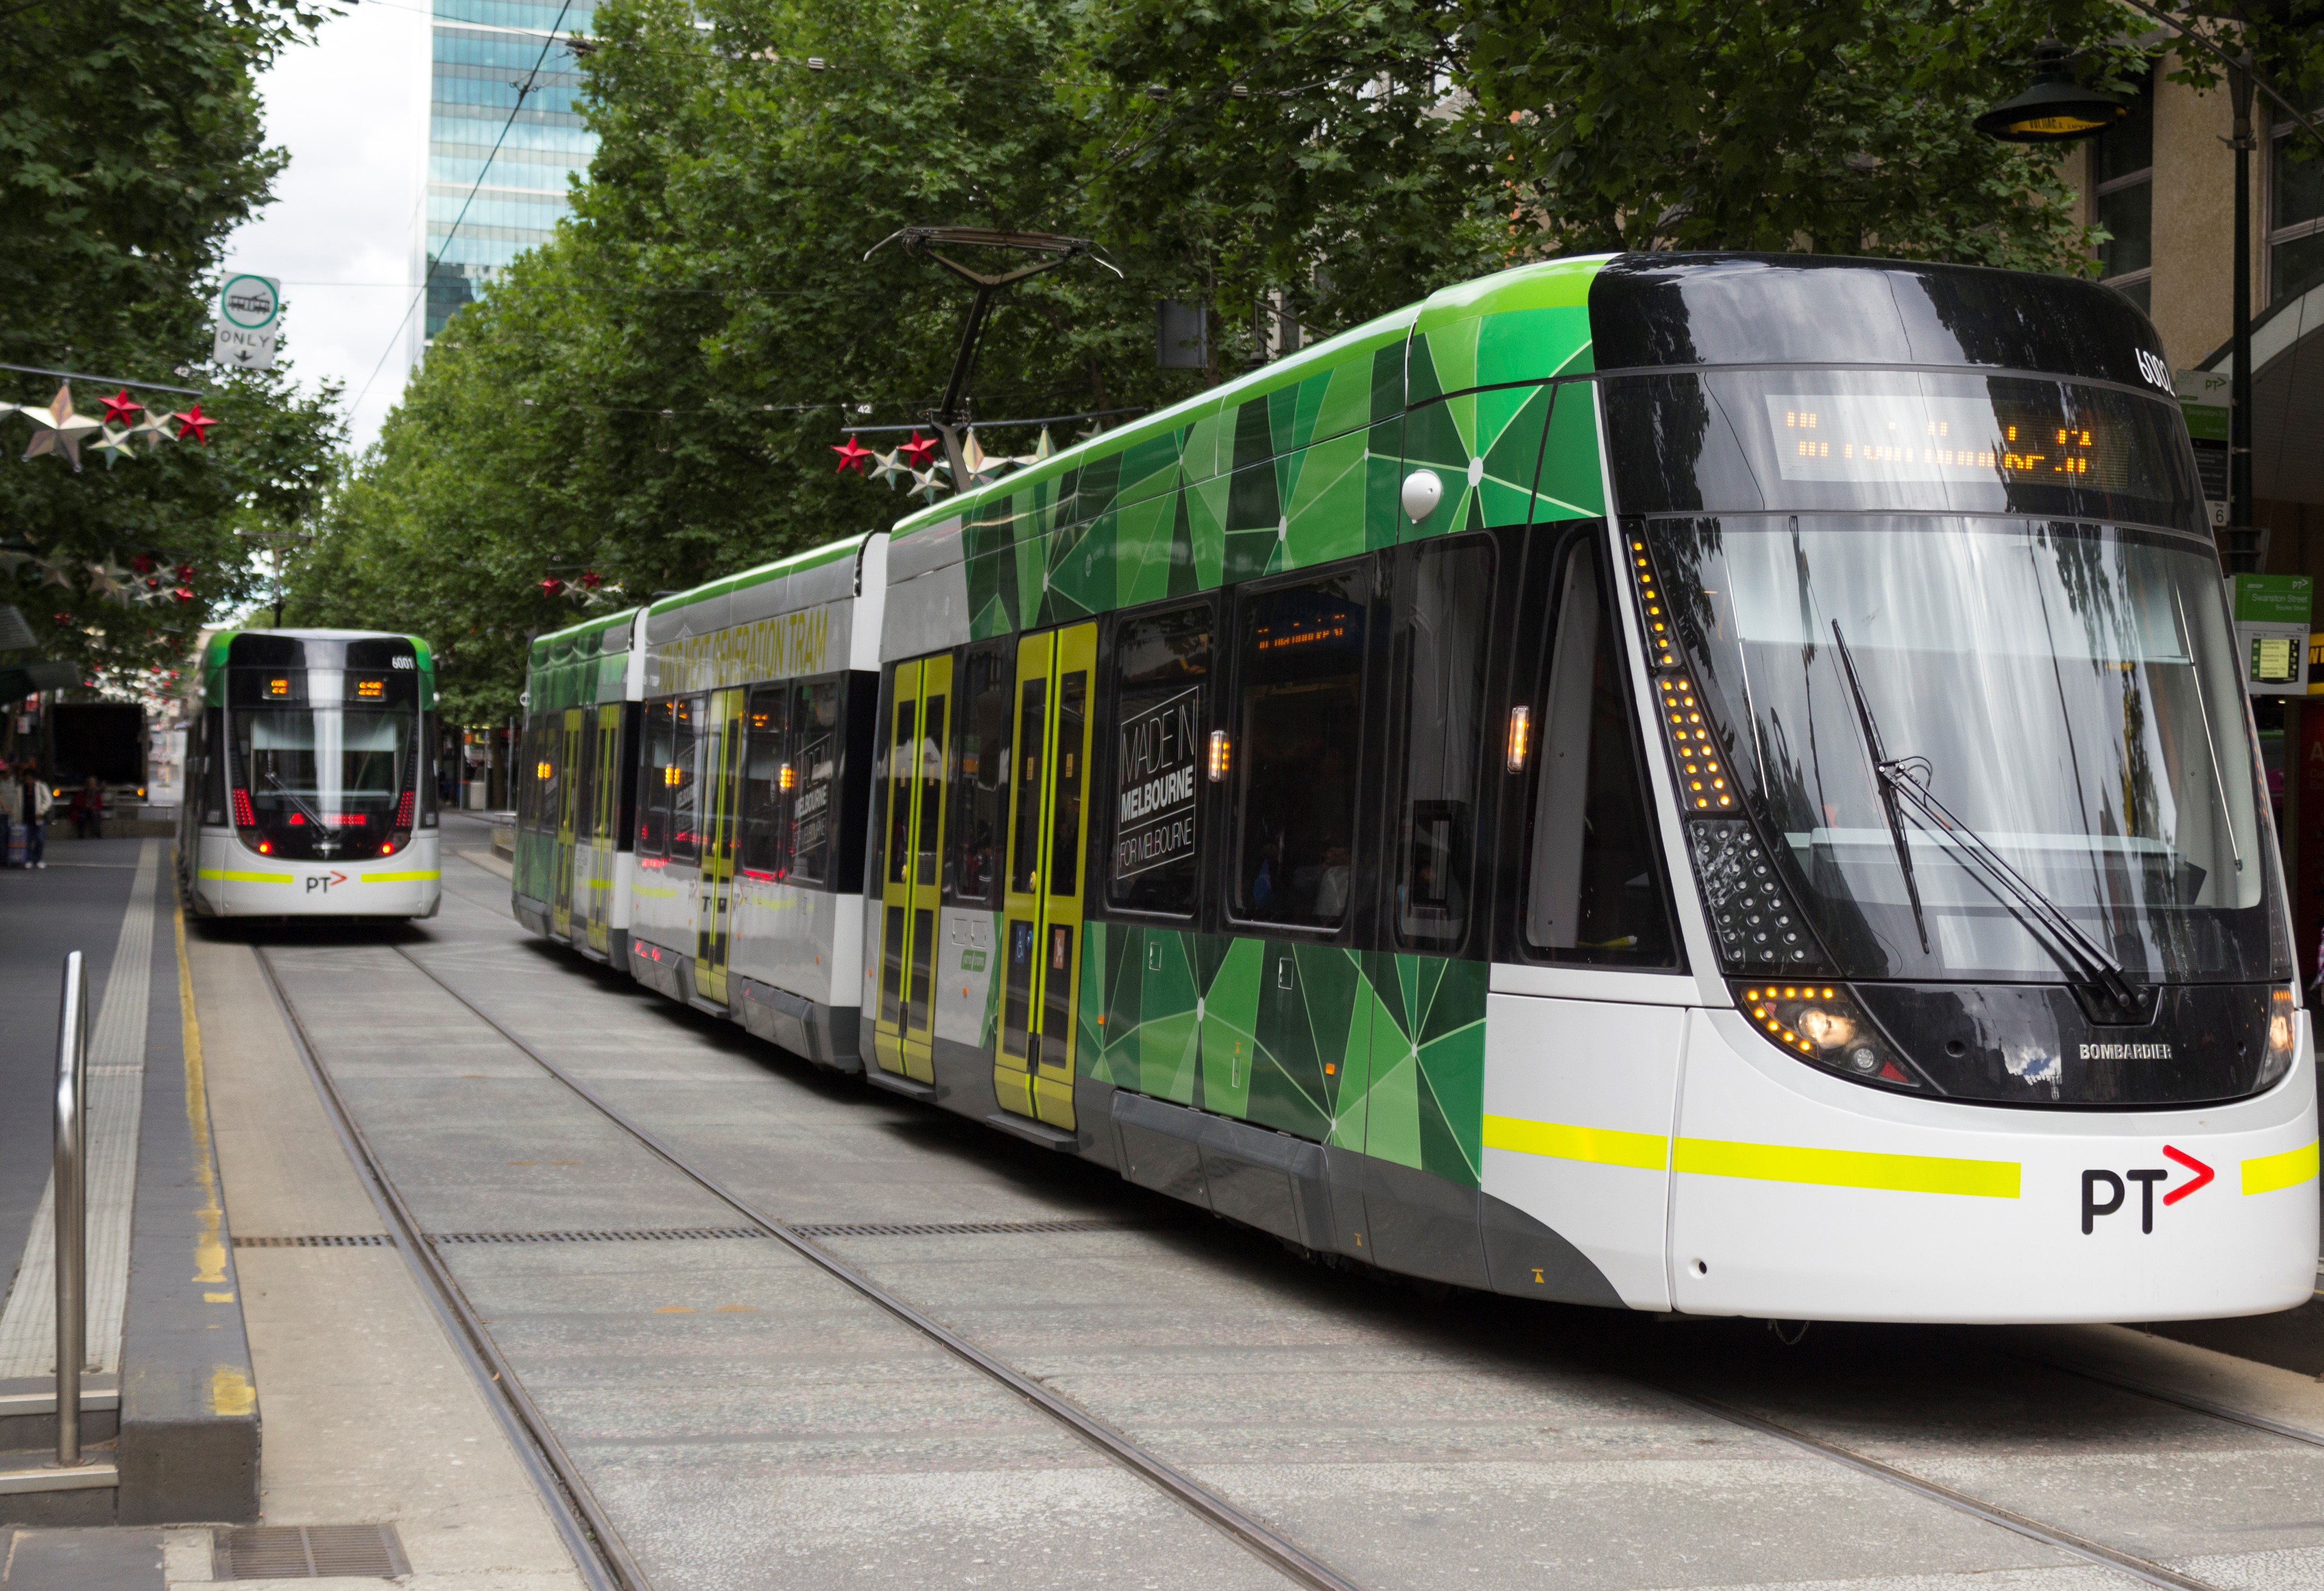 E_6001_and_E_6002_(Melbourne_trams)_in_Bourke_St_on_route_96,_2013